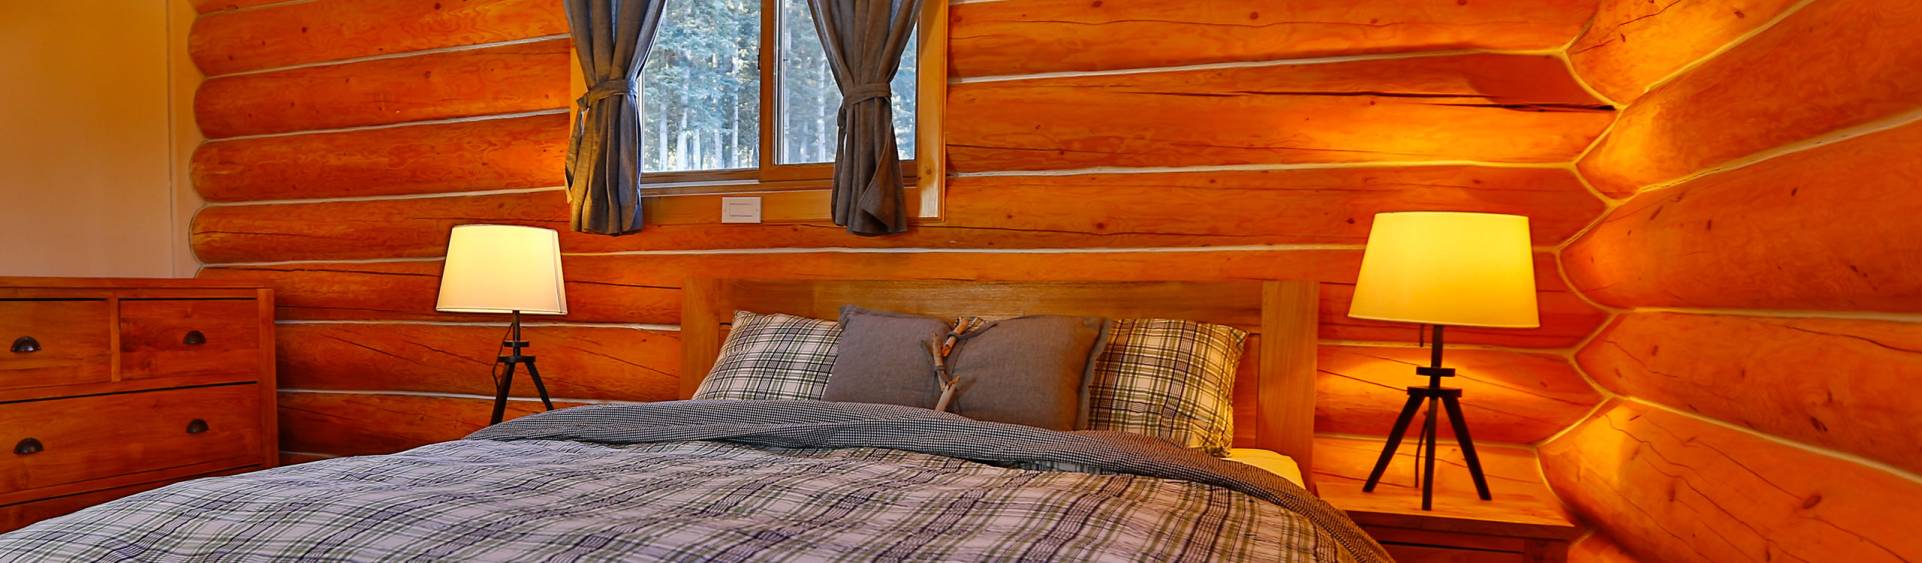 Panorama image of a queen size bed in one of the cabins with cozy lamps next to it